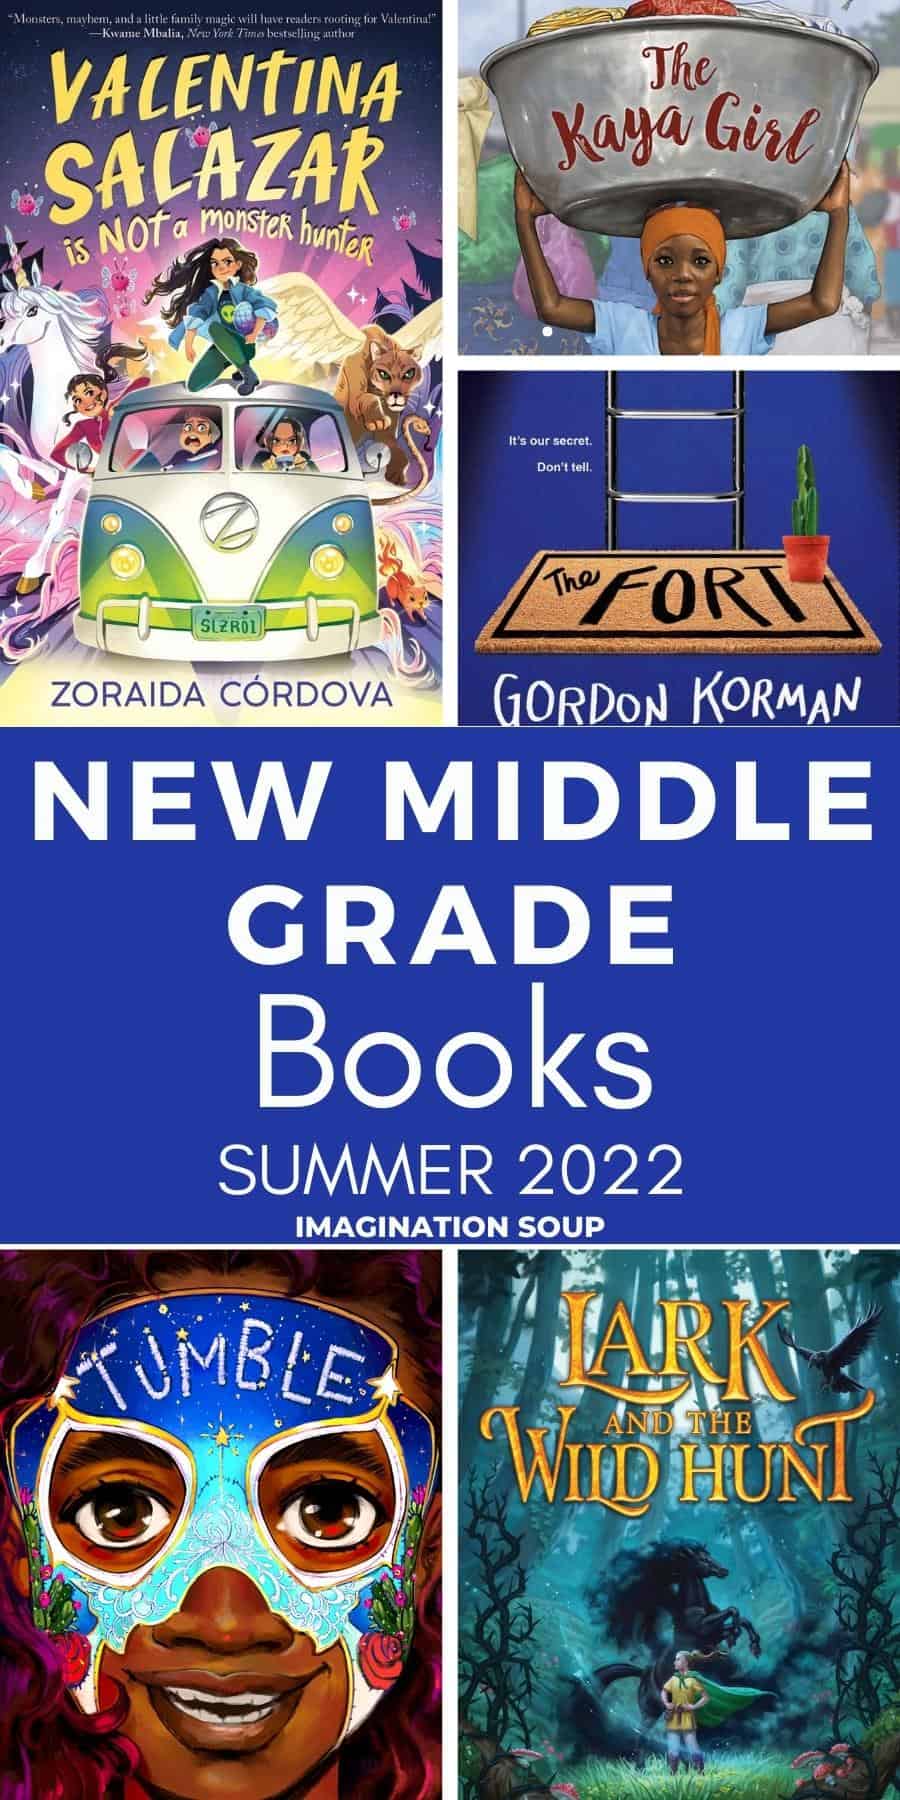 NEW middle grade books July August 2022